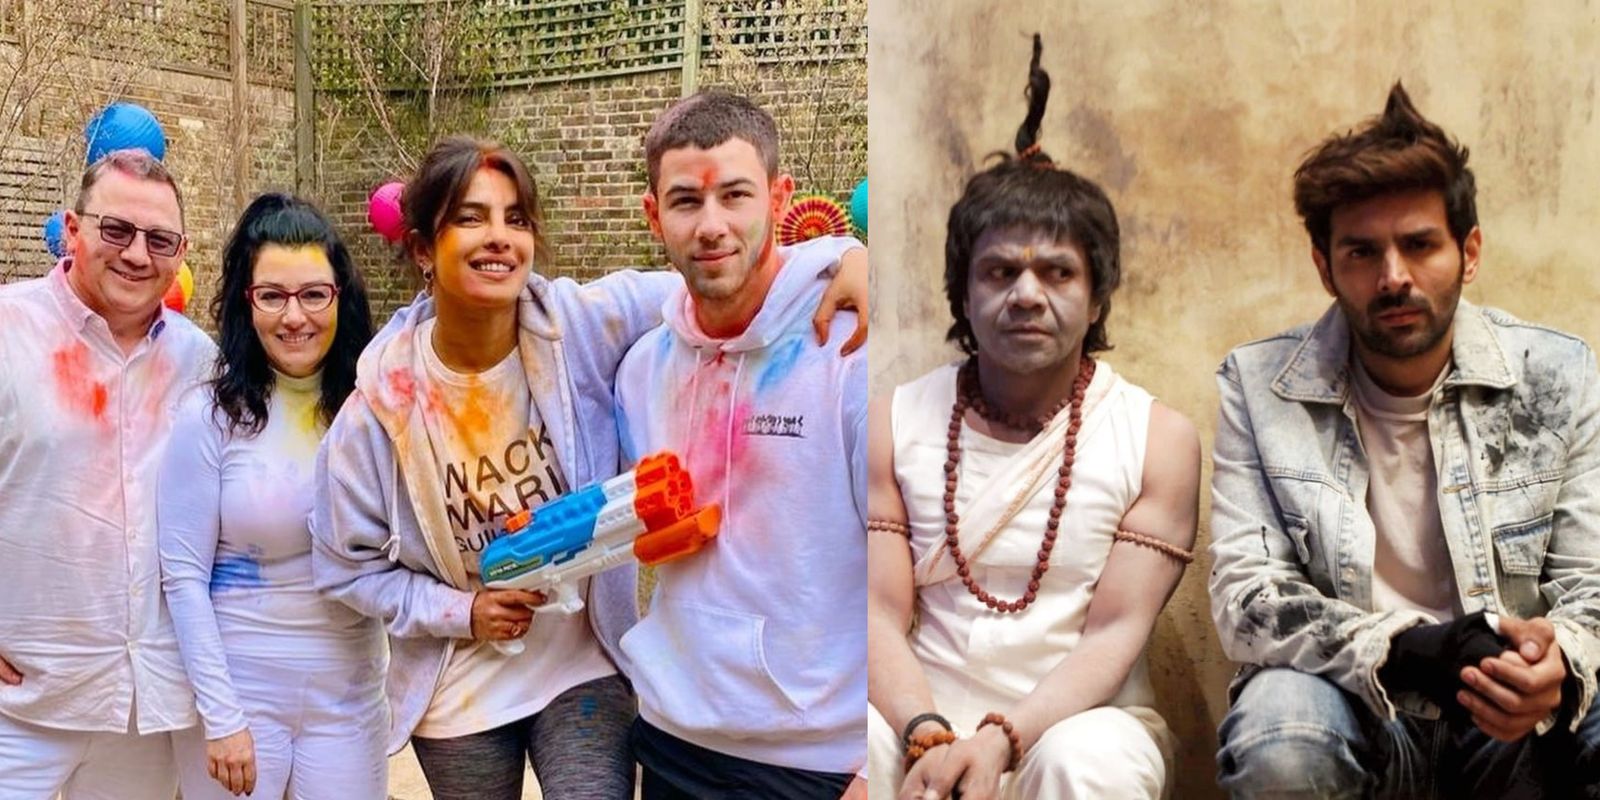 Priyanka, Kartik And Kareena Among Other Celebs Wish Fans A Very Happy Holi In Their Own Special Way